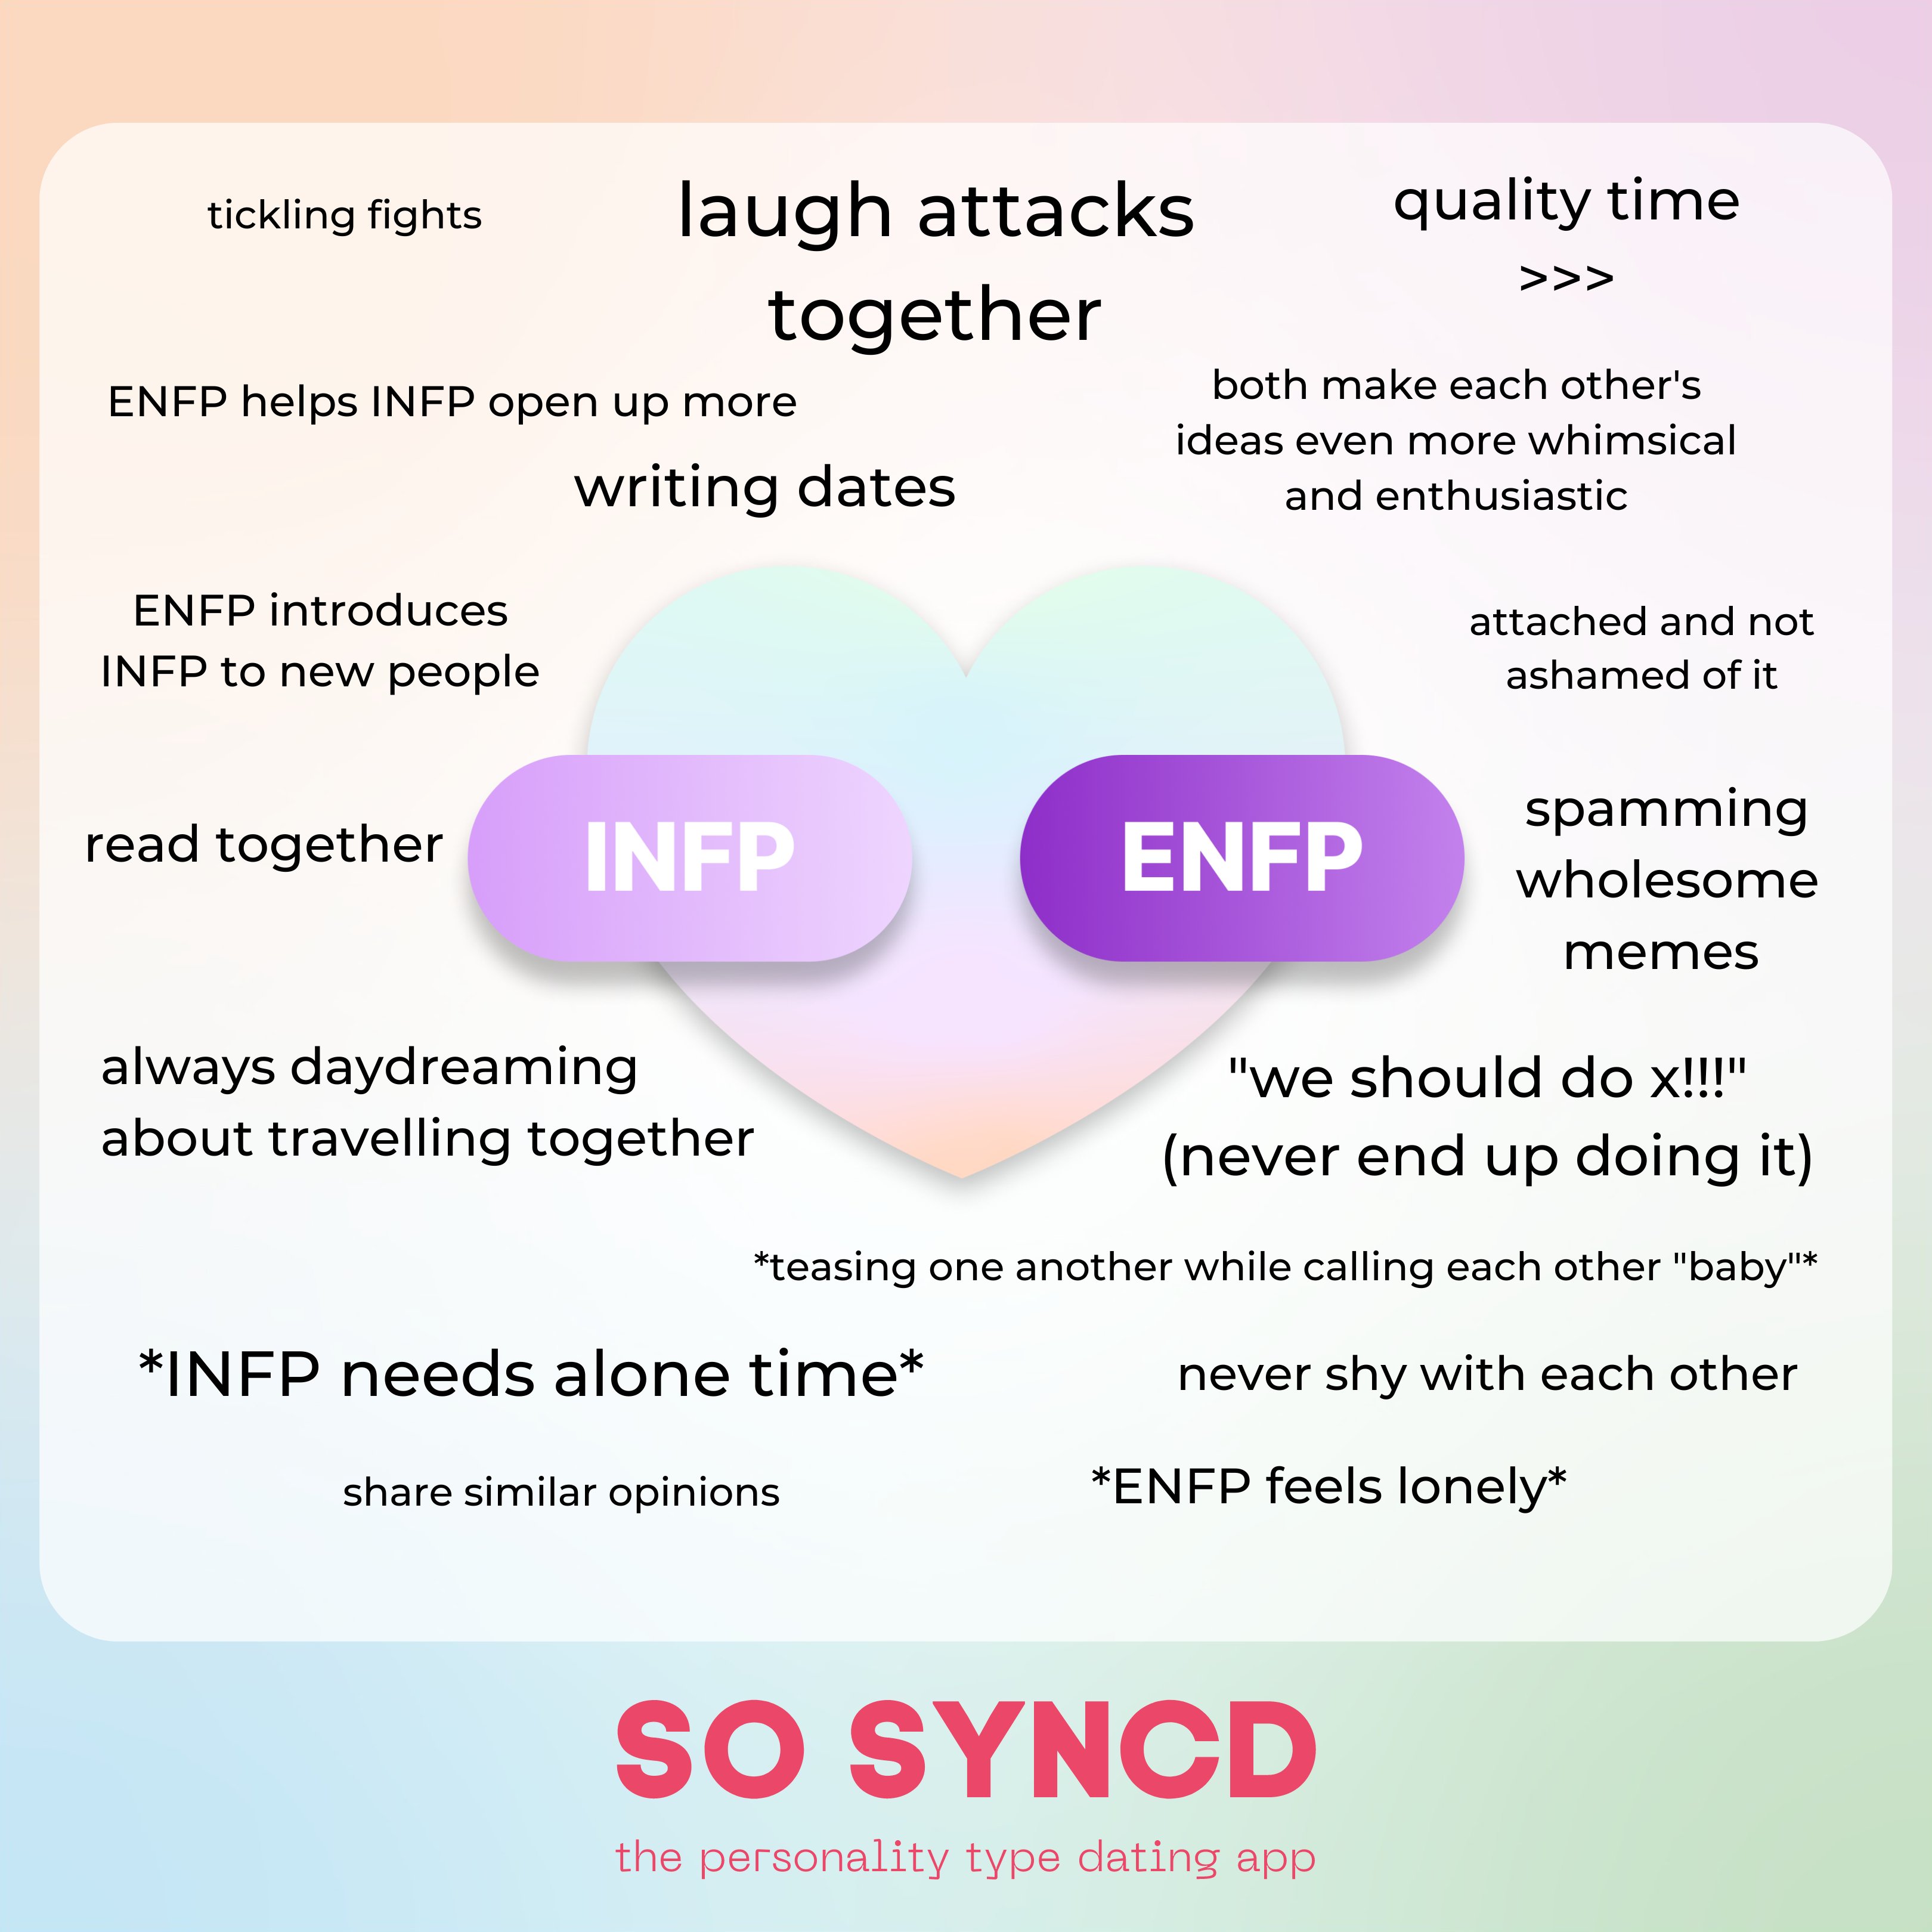 ENFP to INFP <3 : r/ENFP